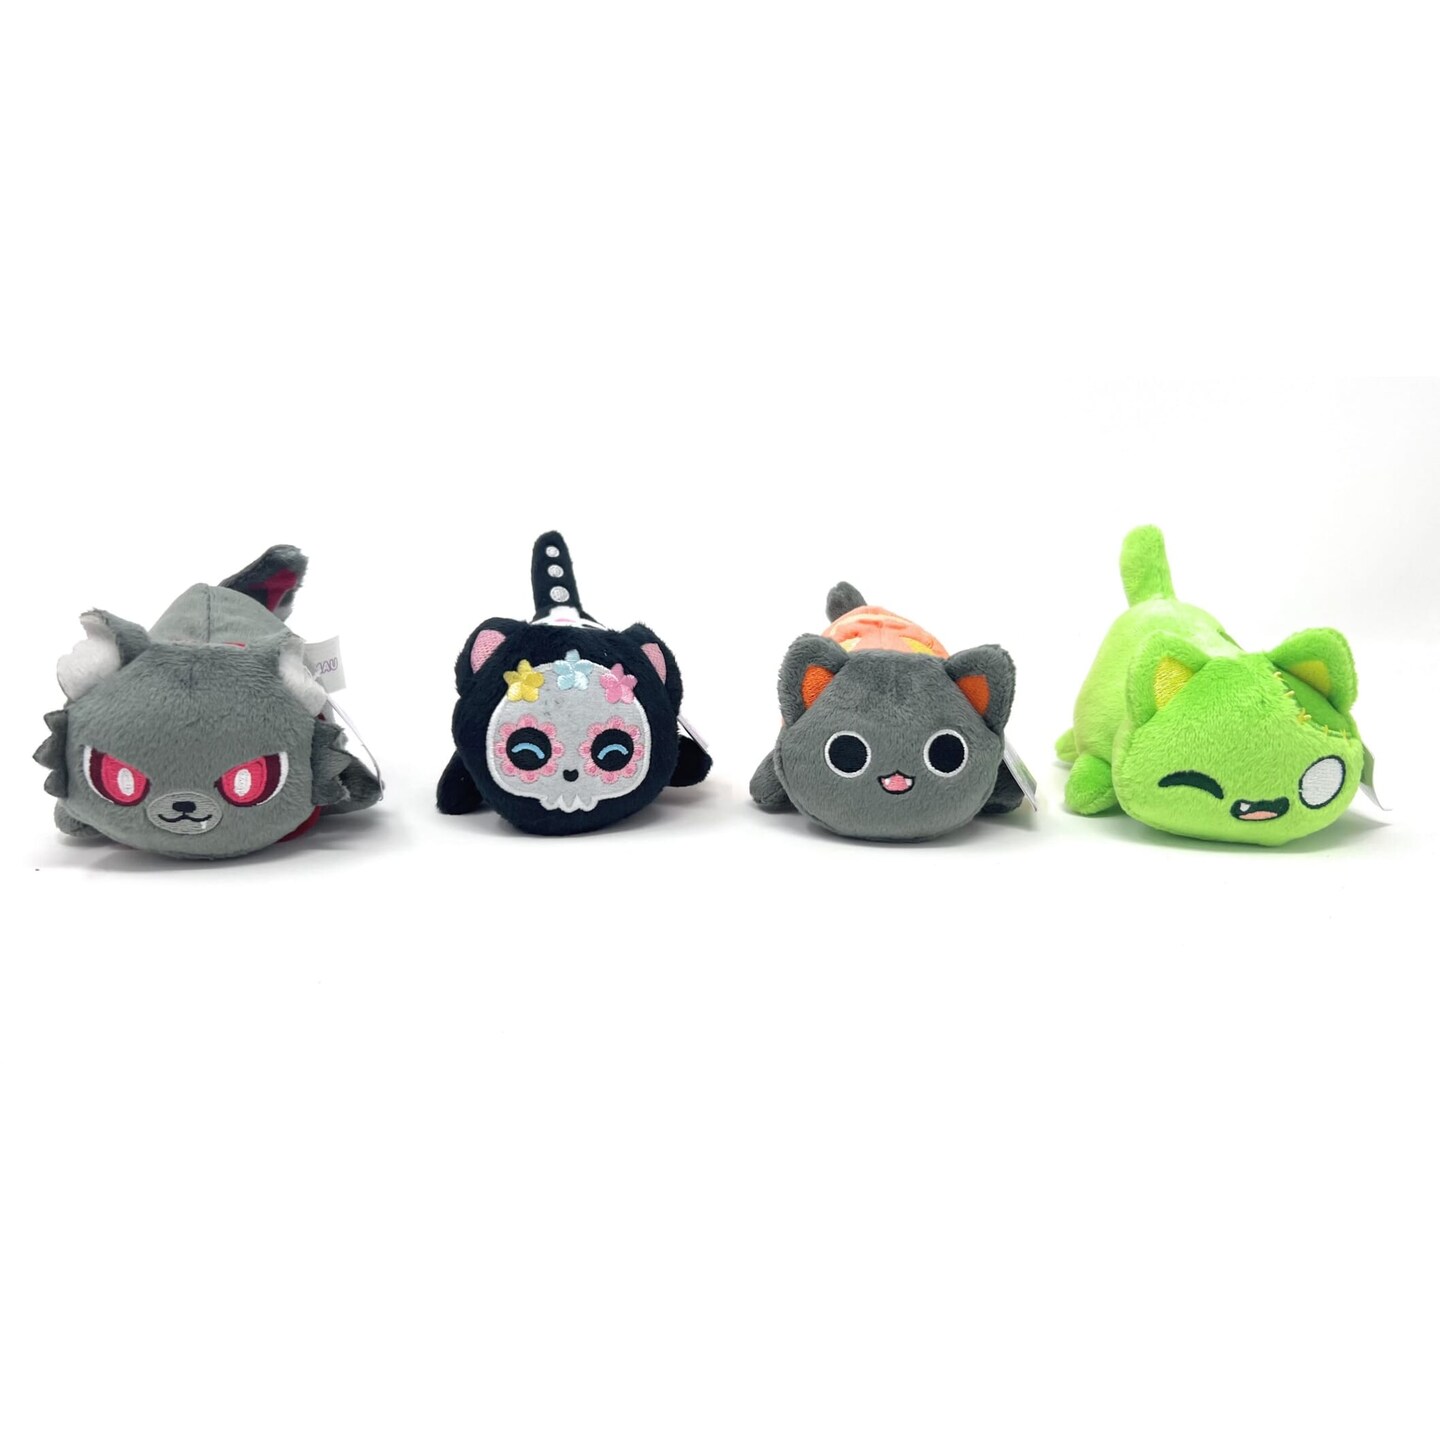 Aphmau MeeMeows YouTube Gaming Channel 4&#x201D; Exclusive Halloween Plush Set of 4 Includes: Pumpkin Kitty , Zombie Kitty , Werewolf Kitty &#x26; Day of The Dead - Sugar Skull Kitty